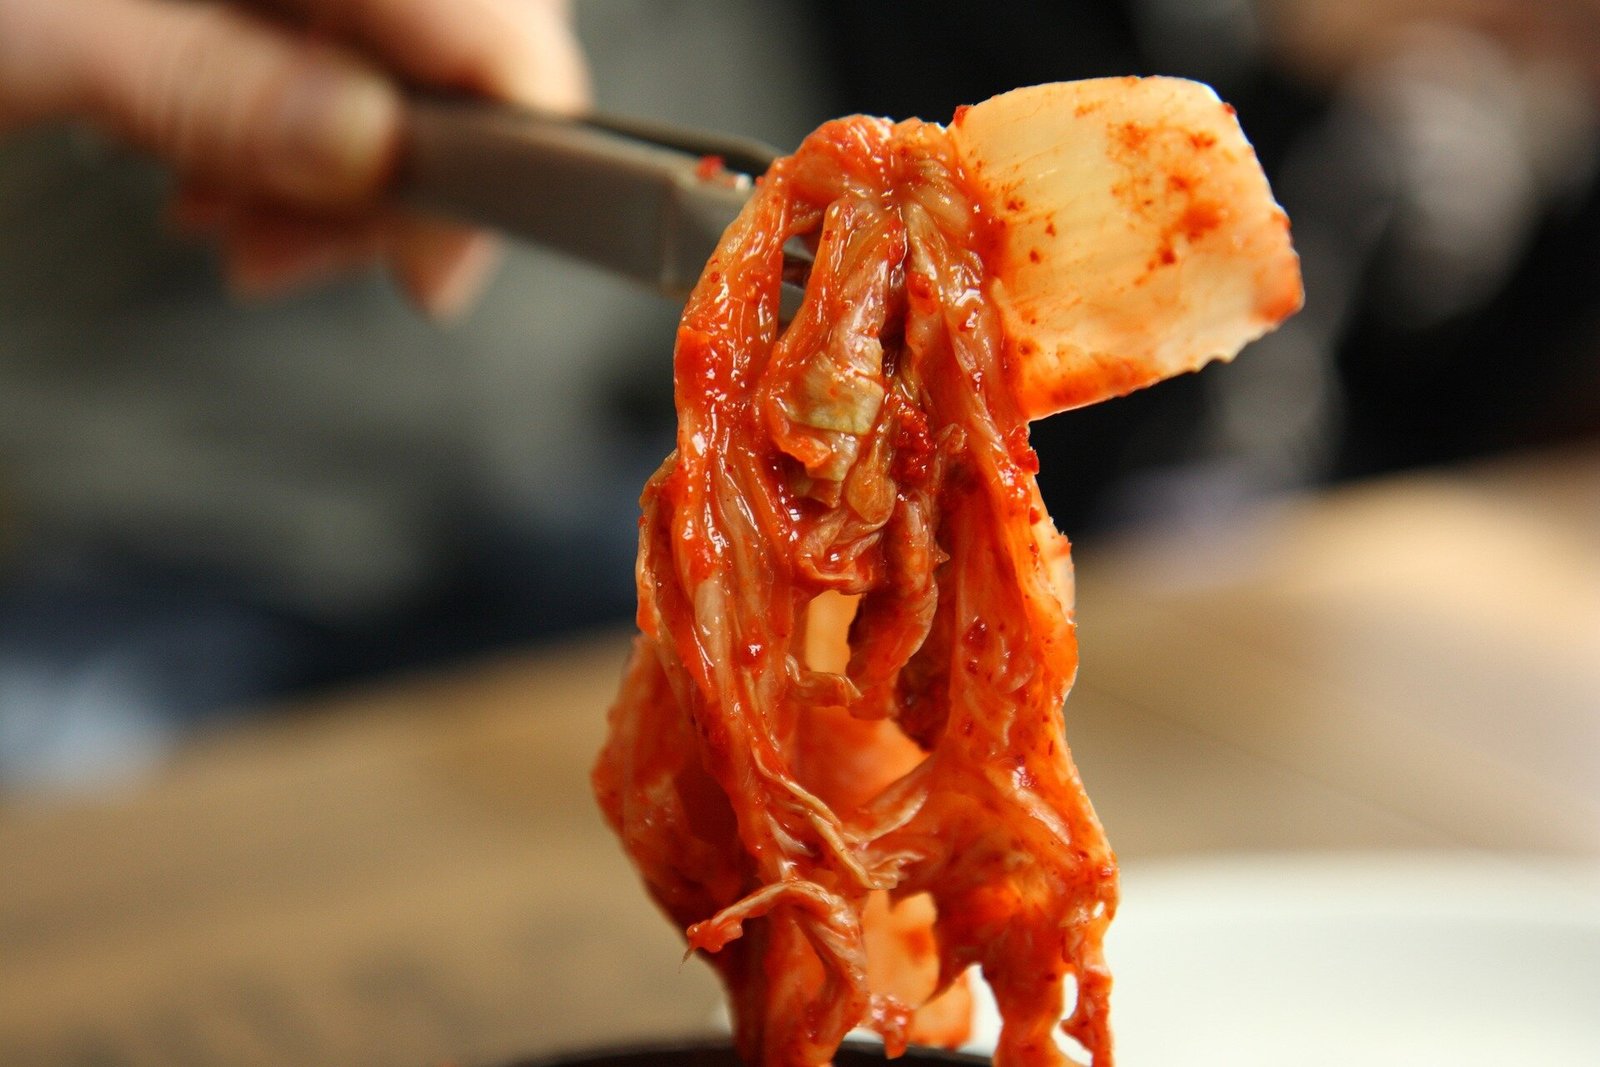 Up to three daily servings of kimchi may lower men’s obesity risk